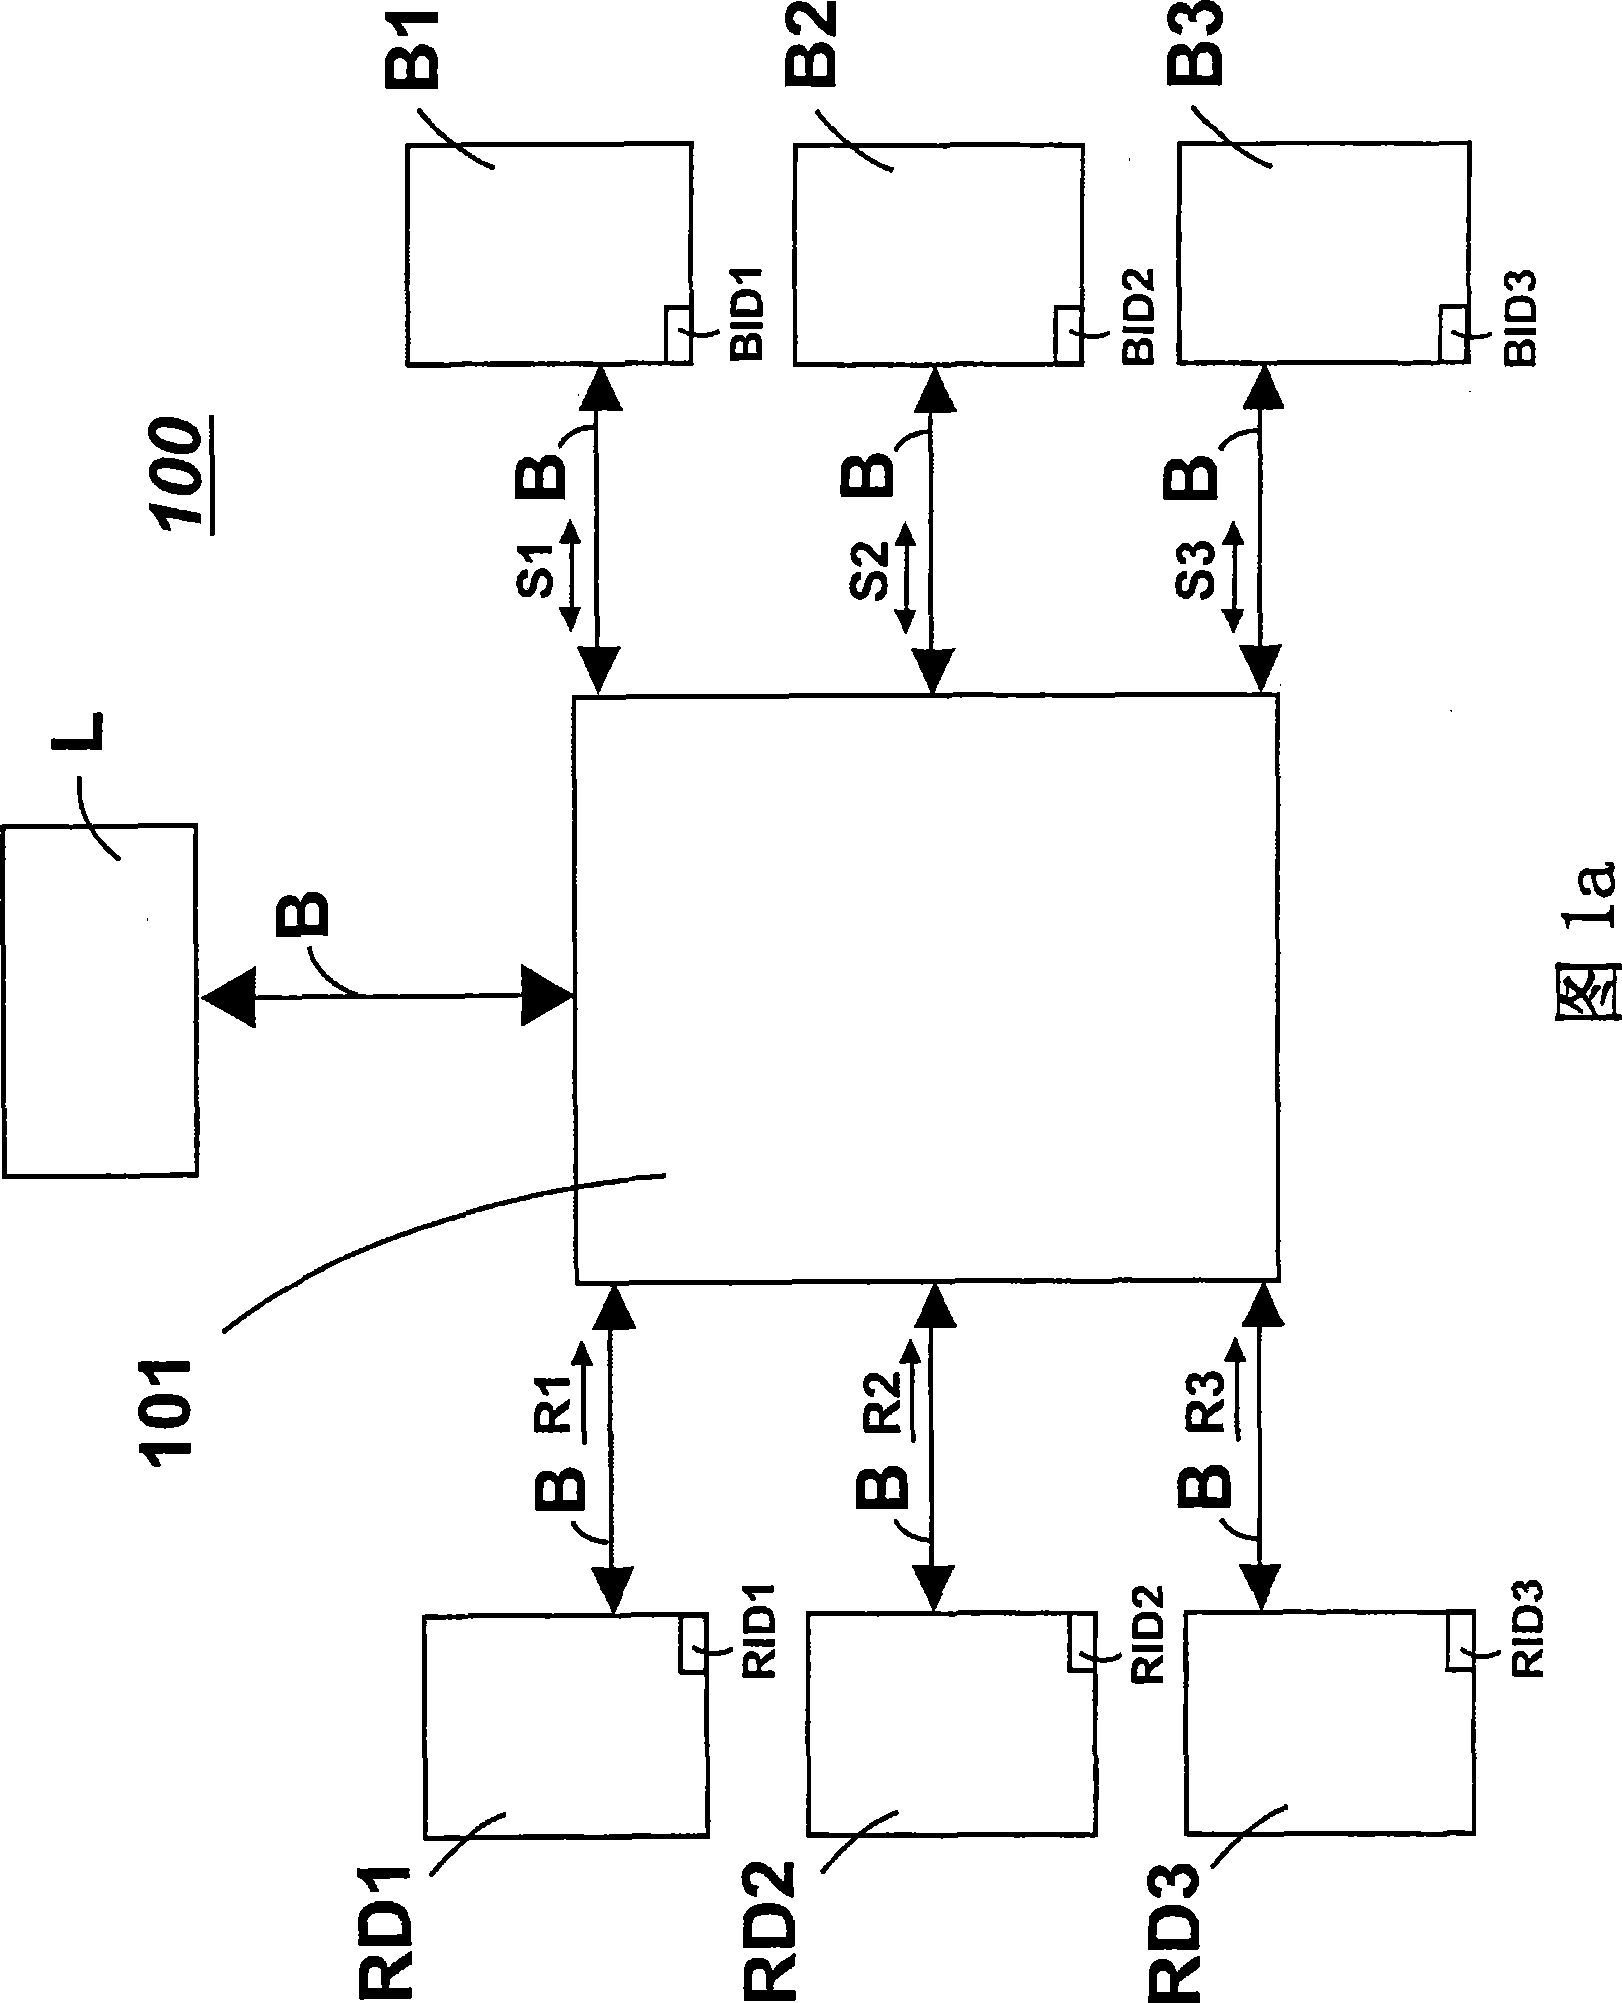 Multi-energy management system, device and applied method wherein